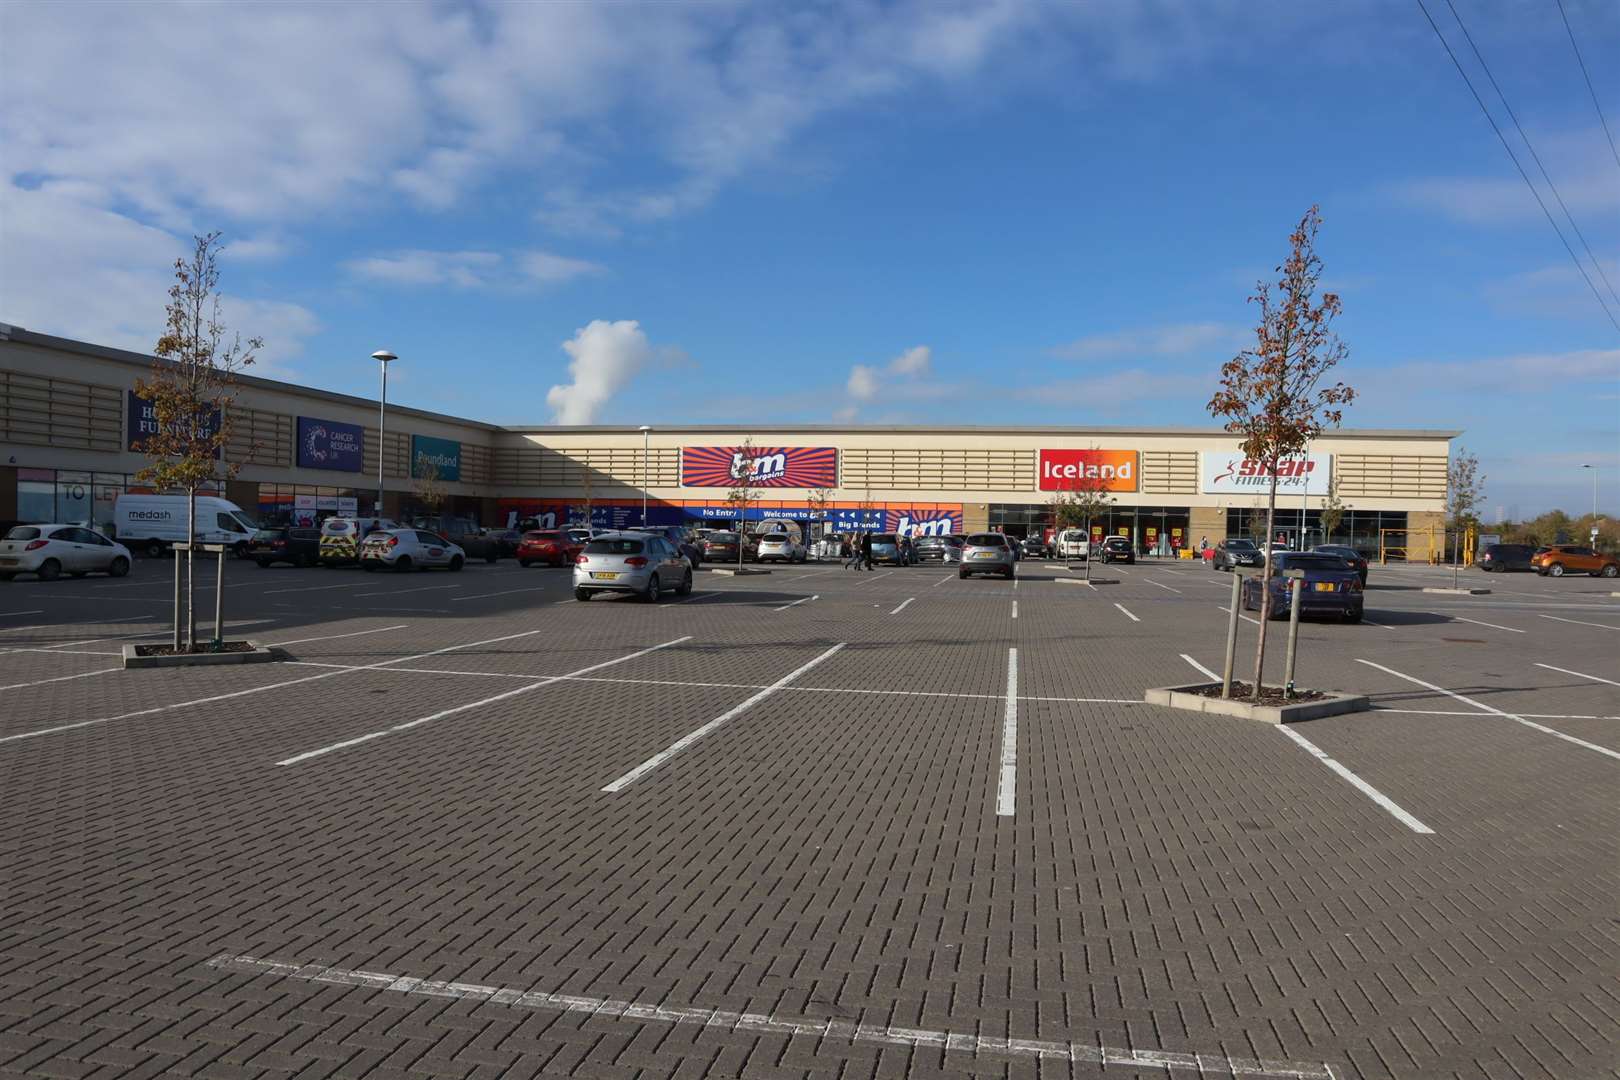 Neats Court Retail Park in Queenborough, Sheppey